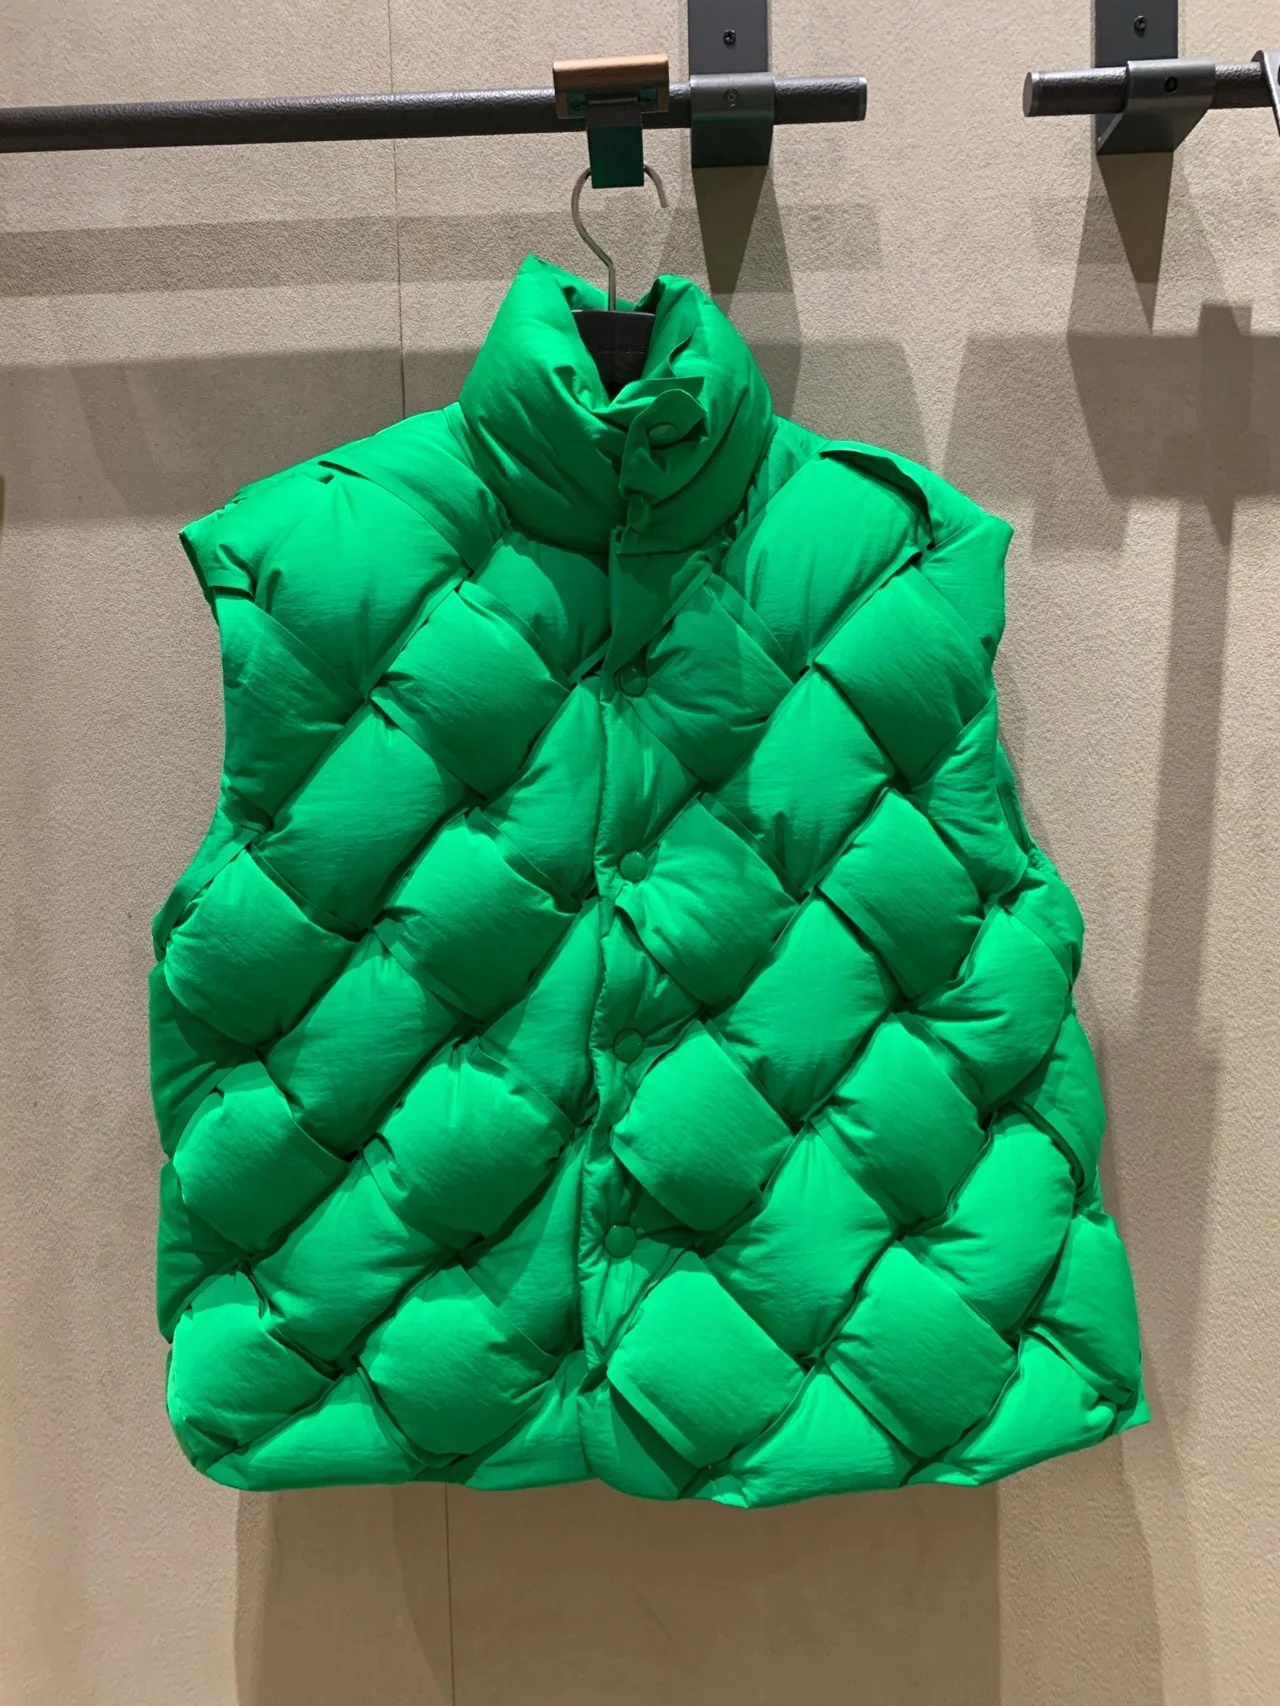 2022 Winter New Fashion Woven Pattern Warm Down Vest Jacket Female Green Loose-Fitting Rabbit Fur Cotton Sleeveless Vests Ladies images - 6